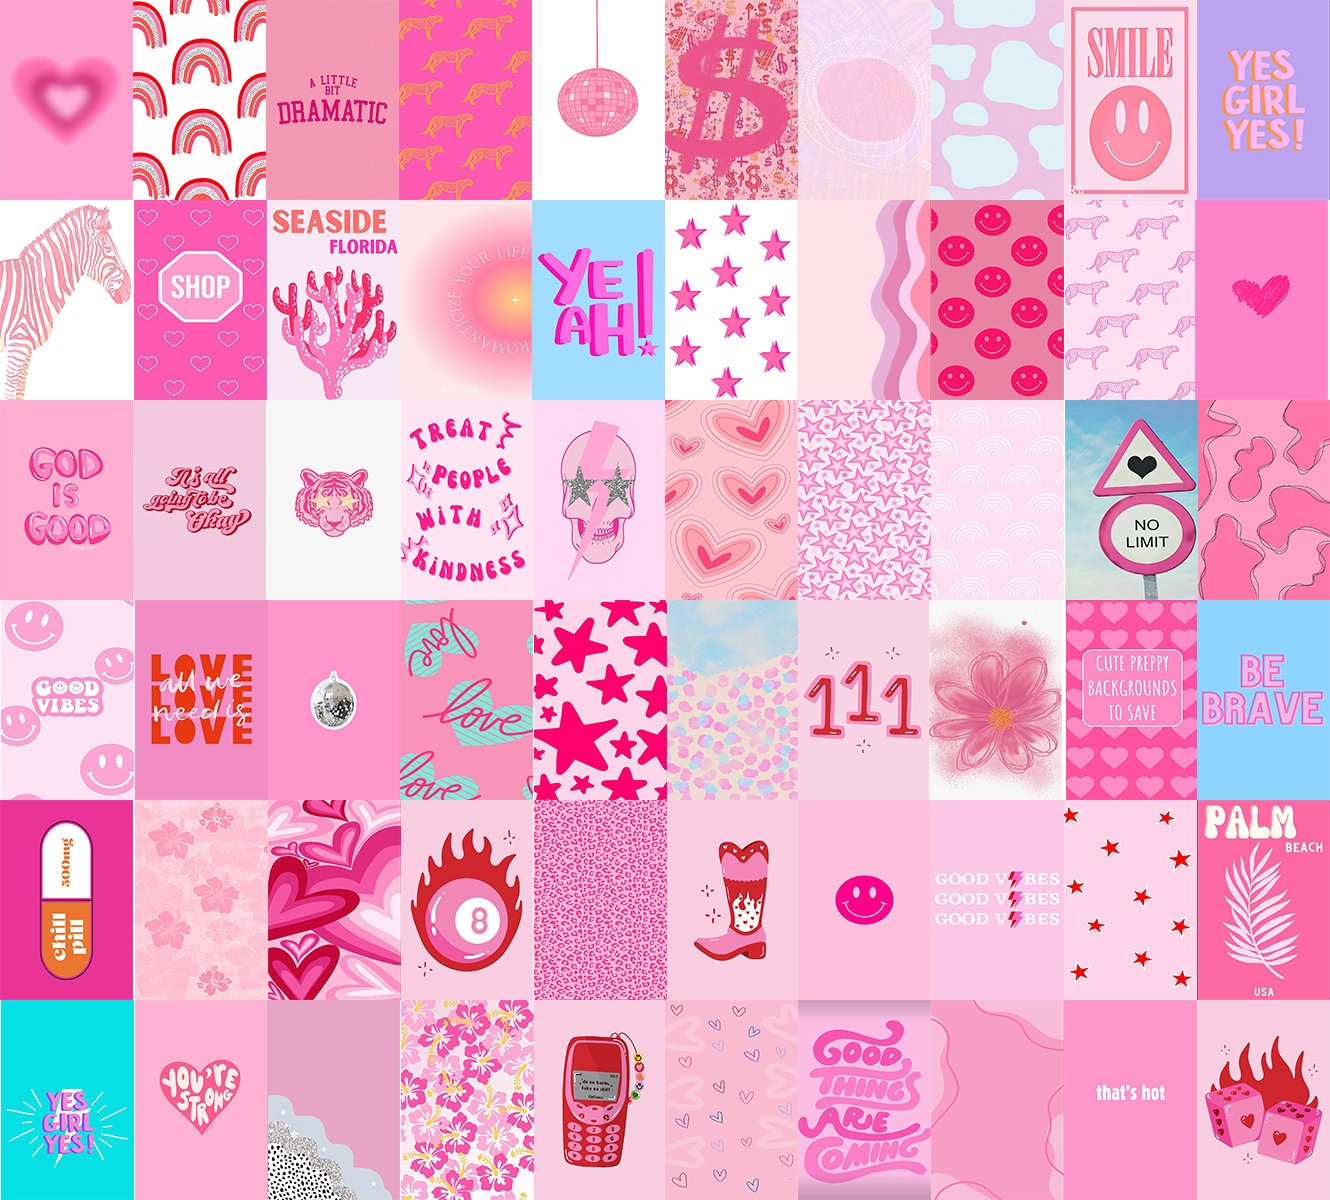 Buy Pink Preppy Aesthetic Wall Collage Kit Preppy Pink Room Online in India   Etsy